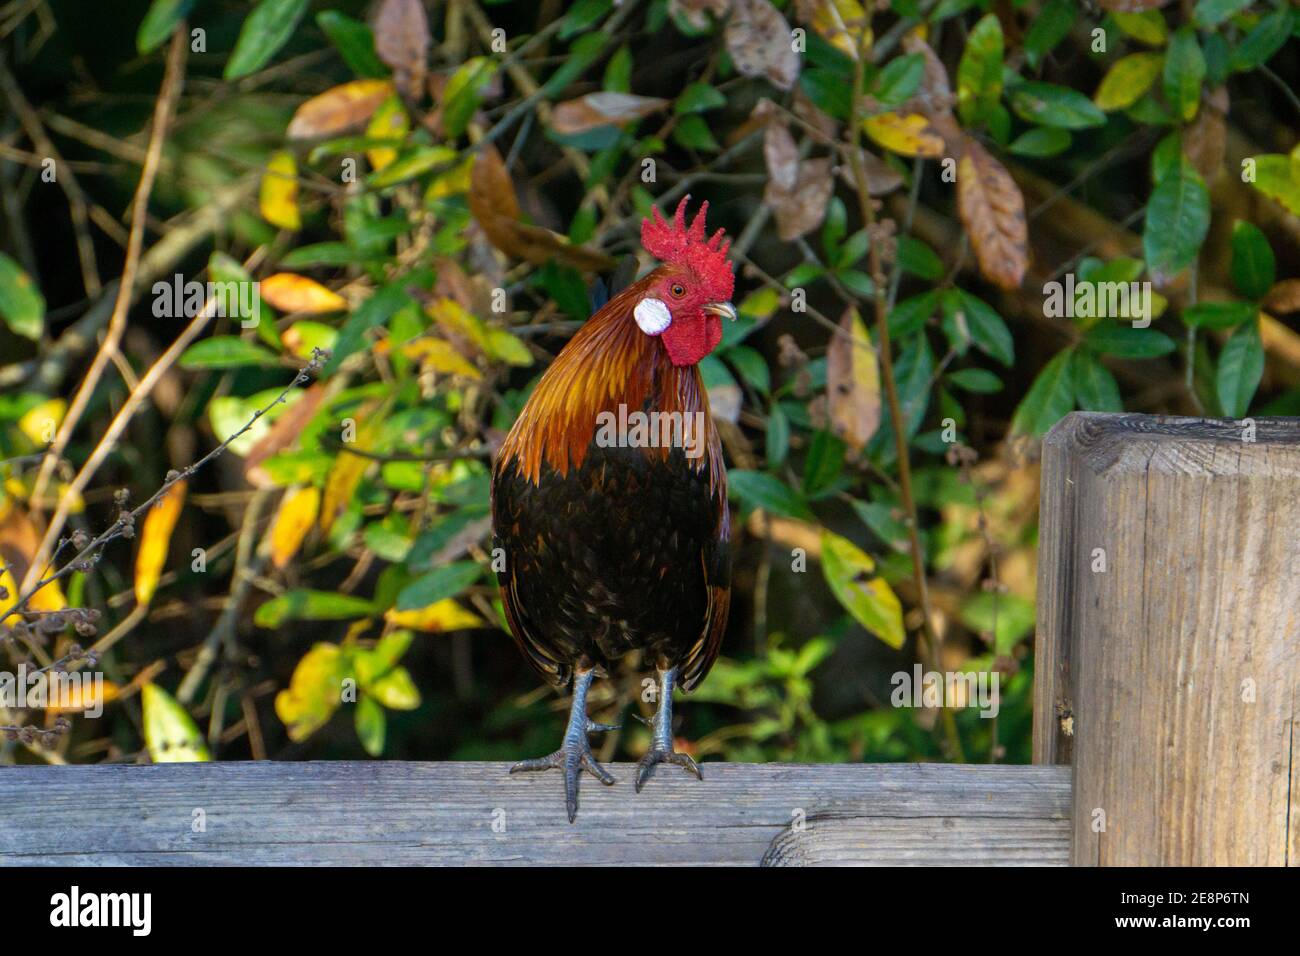 Male Red Junglefowl (Gallus gallus, domestic chicken ancestor) rooster standing on a fence post, Steven J. Fousek Preserve, St. Lucie County, Florida Stock Photo